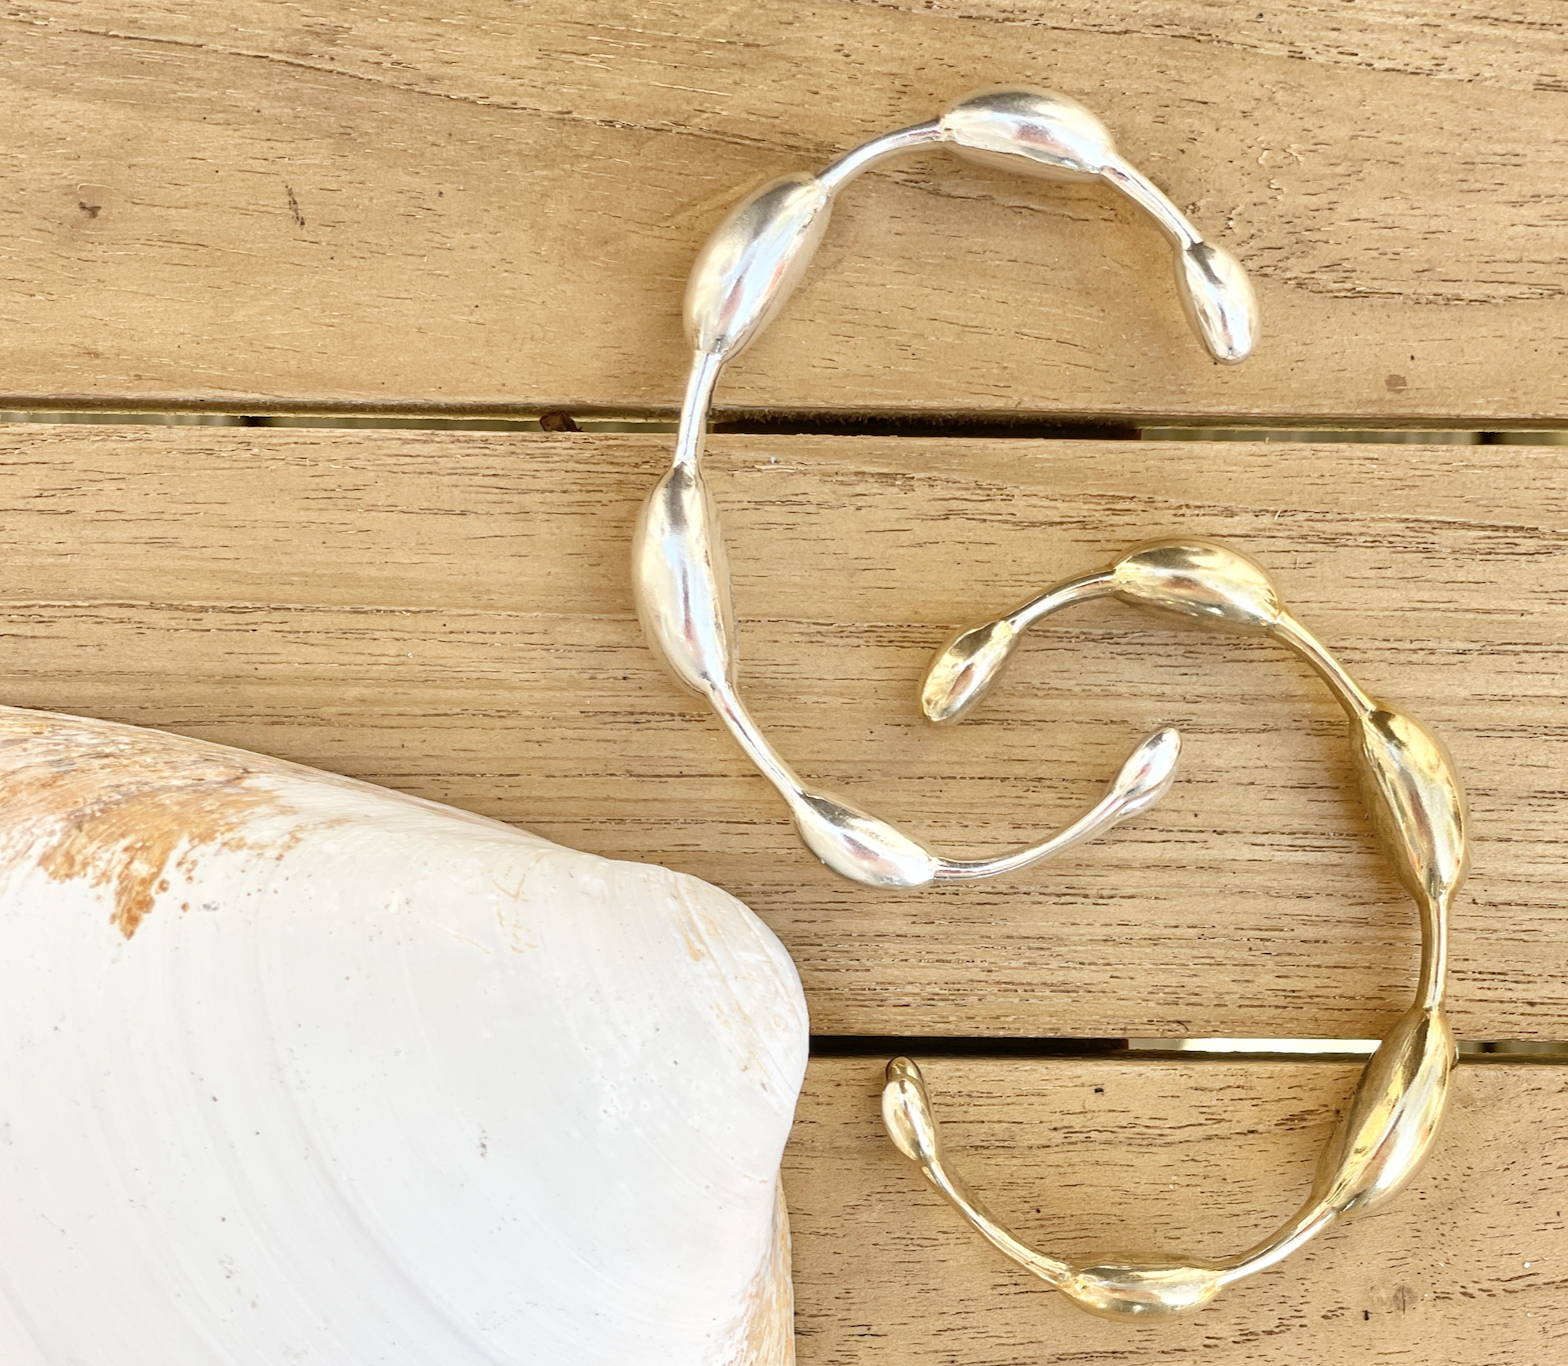 Brass and silver seaweed bracelets with clam shell